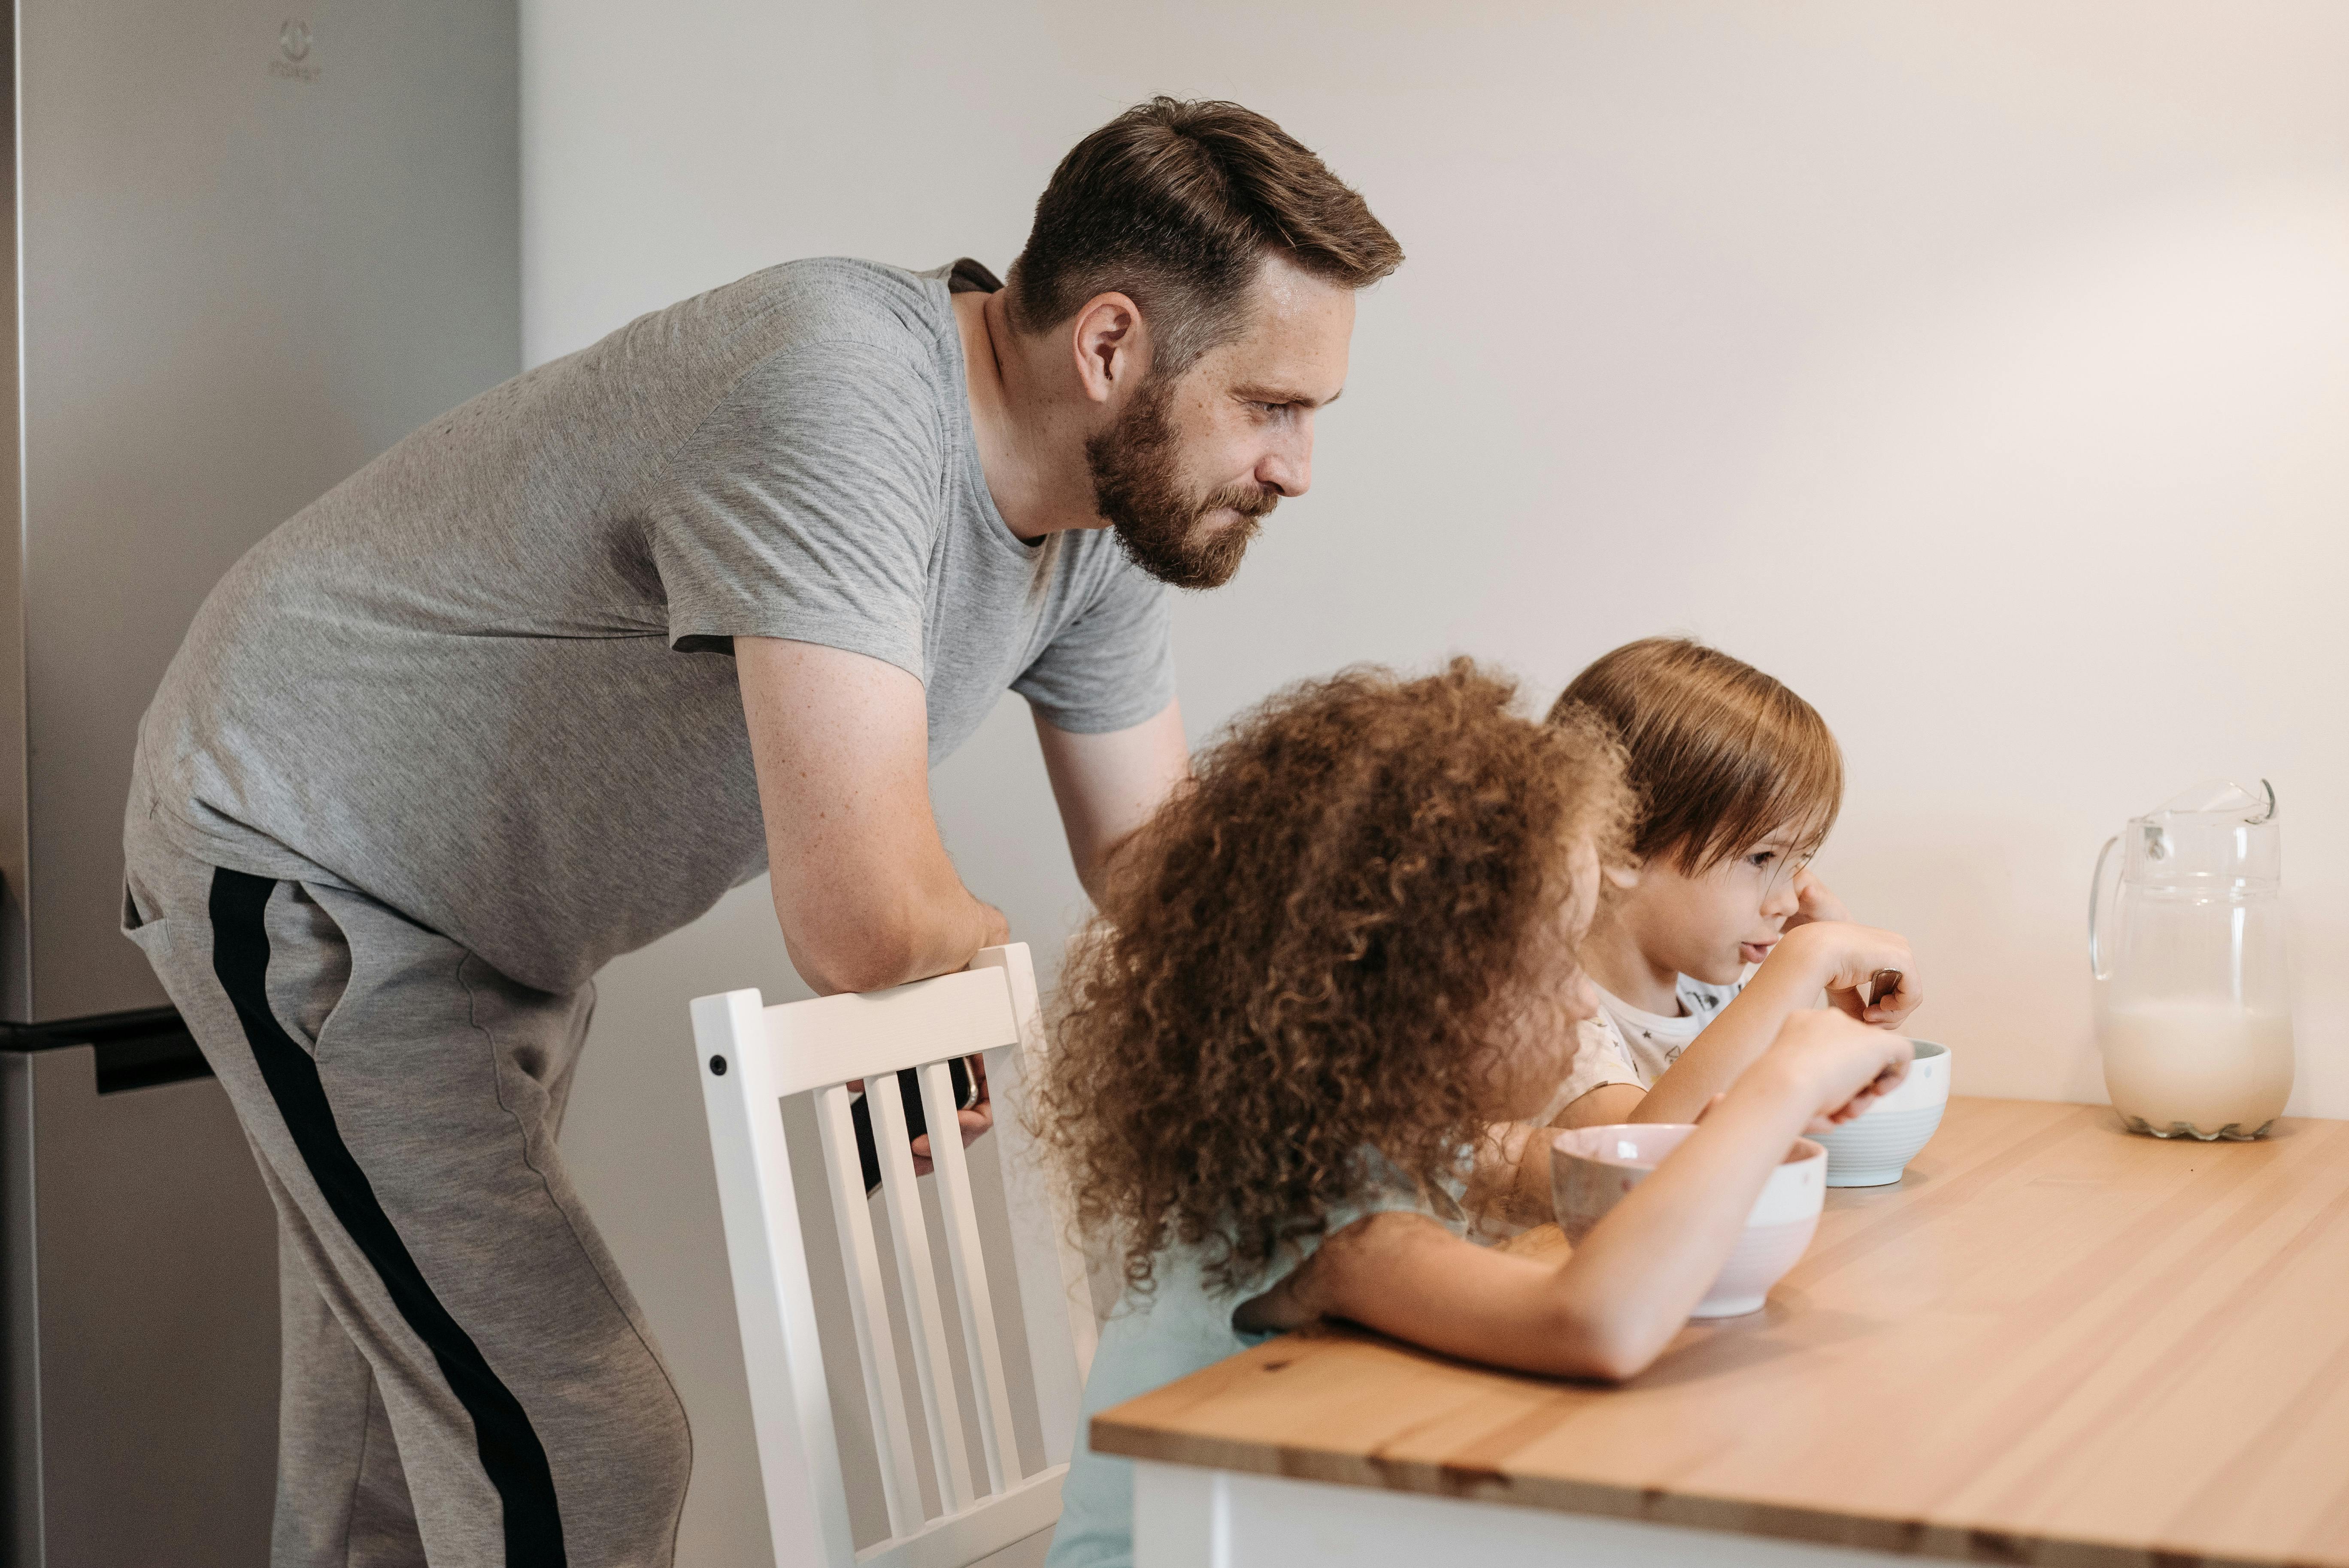 A father watching his two girls eat breakfast | Source: Pexels